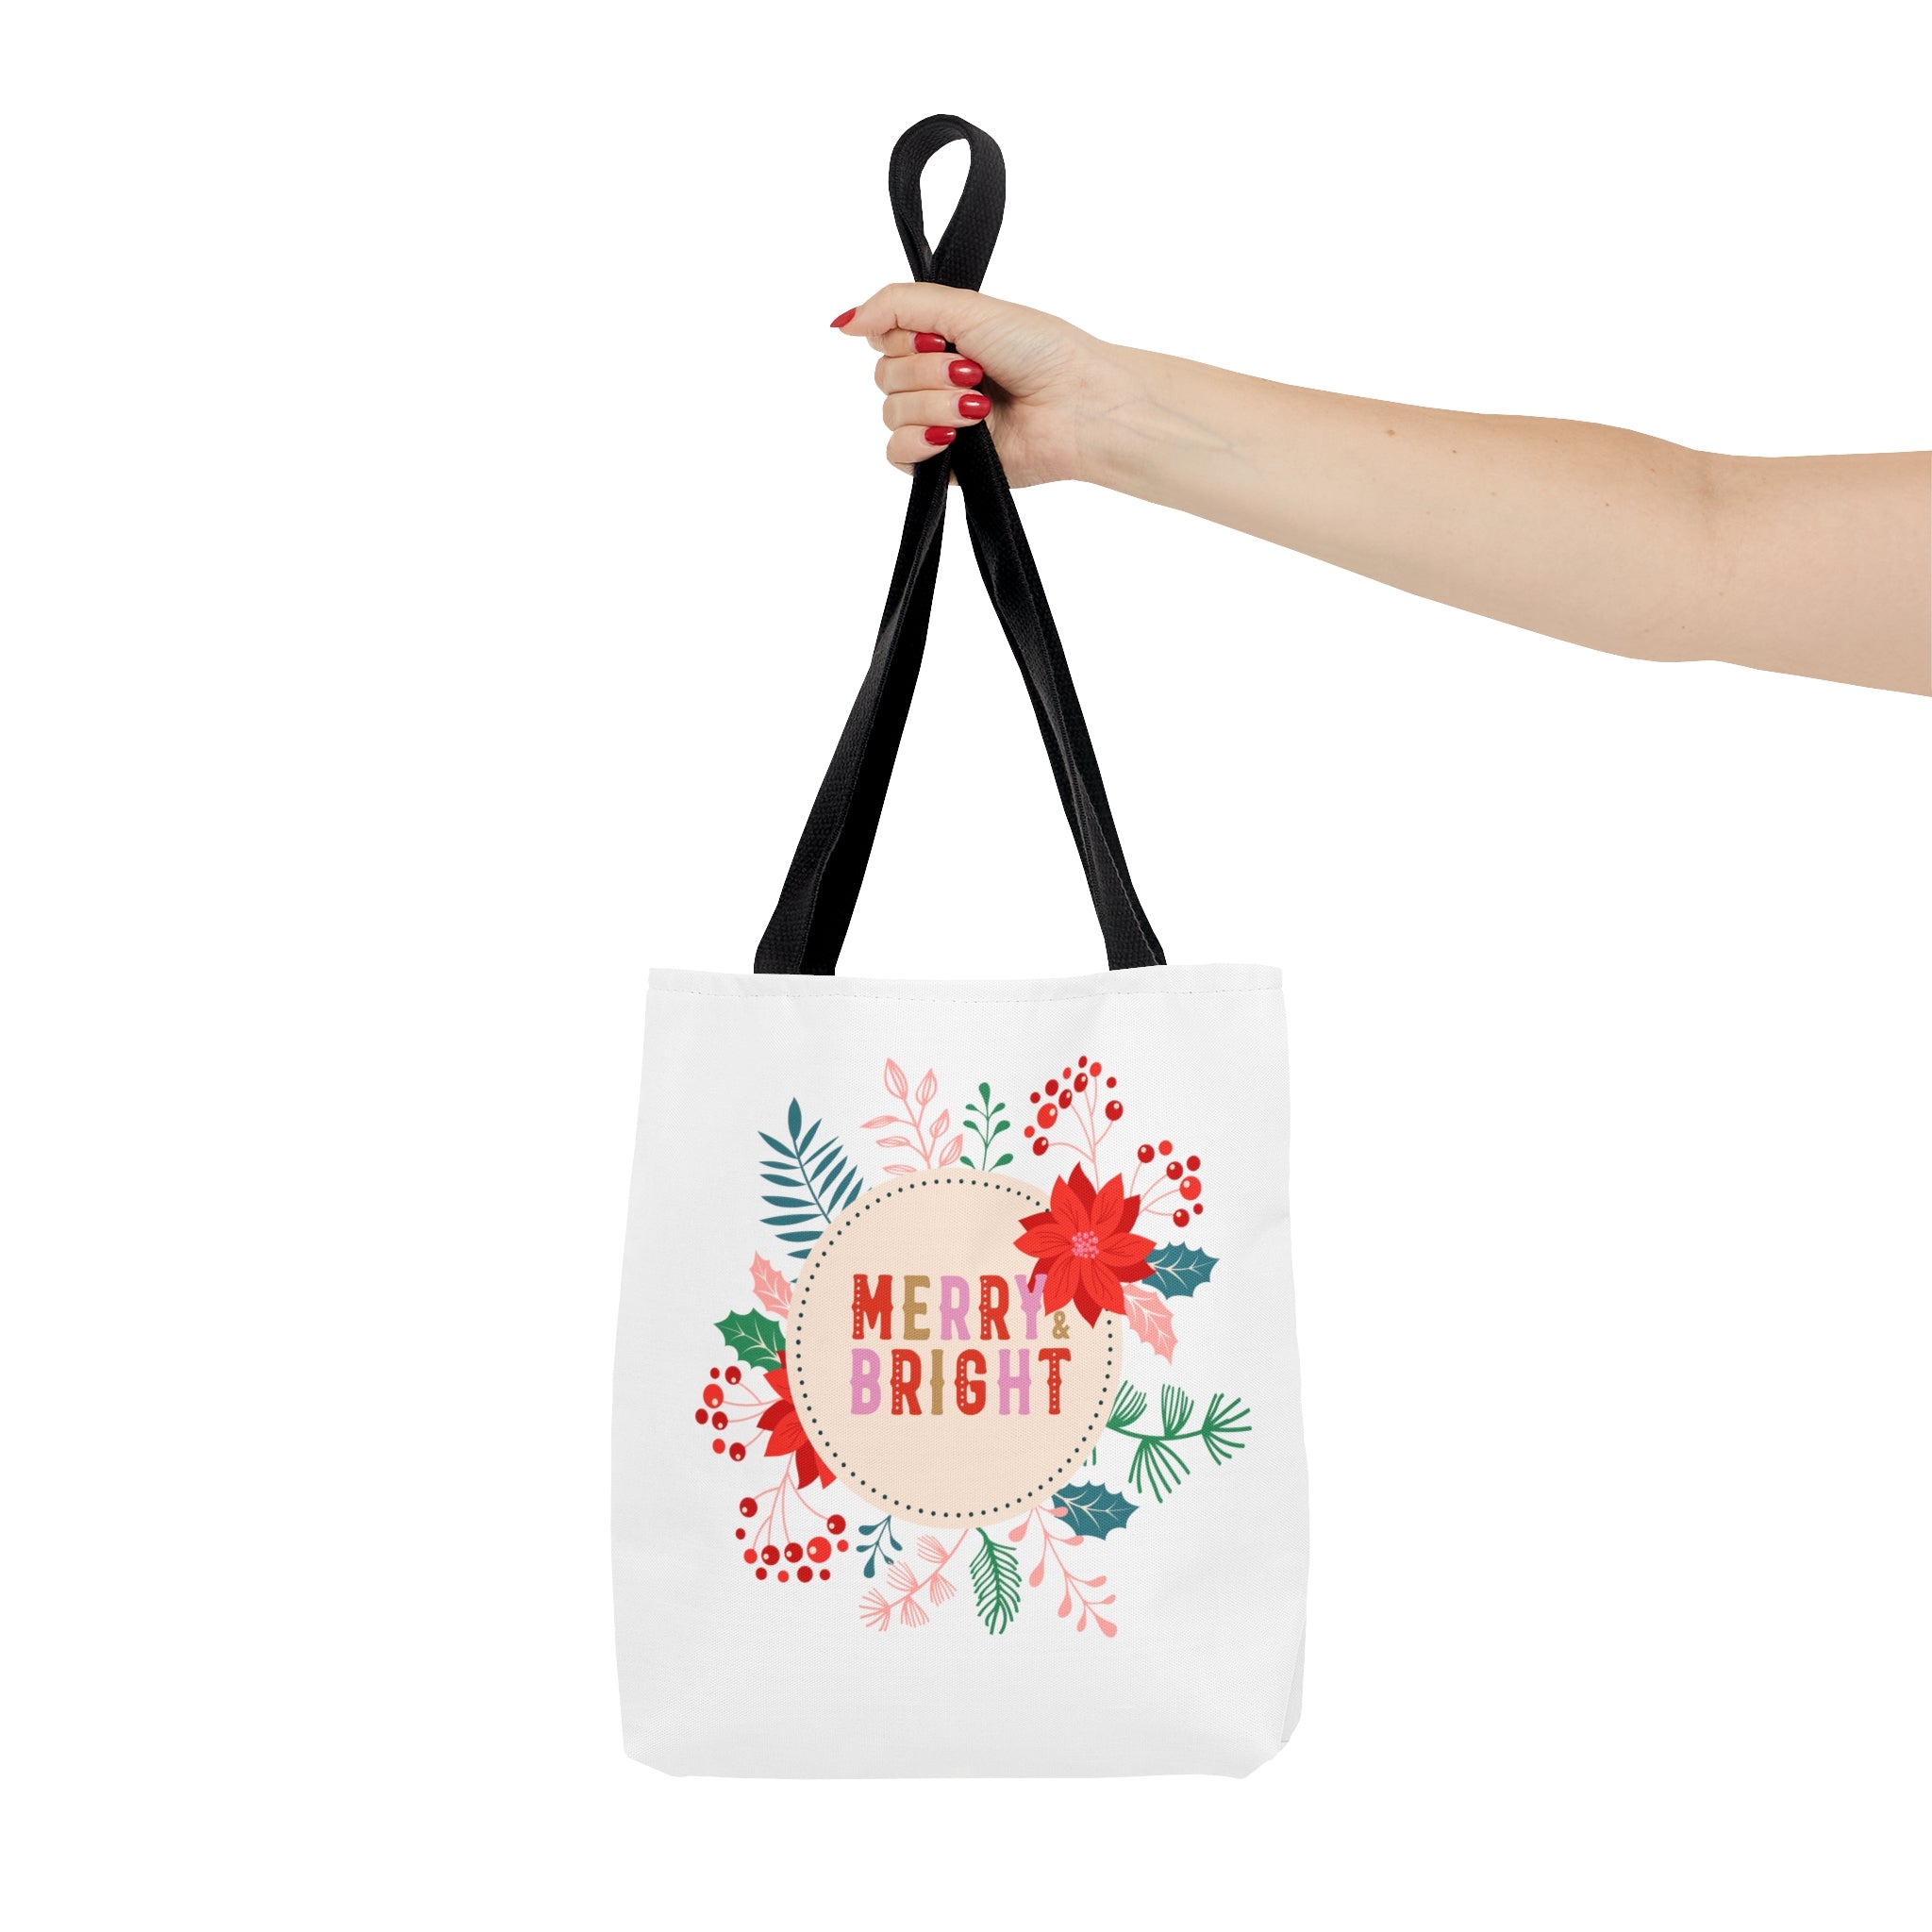 Merry Bright Tote Bags White, Reusable Canvas Tote Bags, Available in Different Size